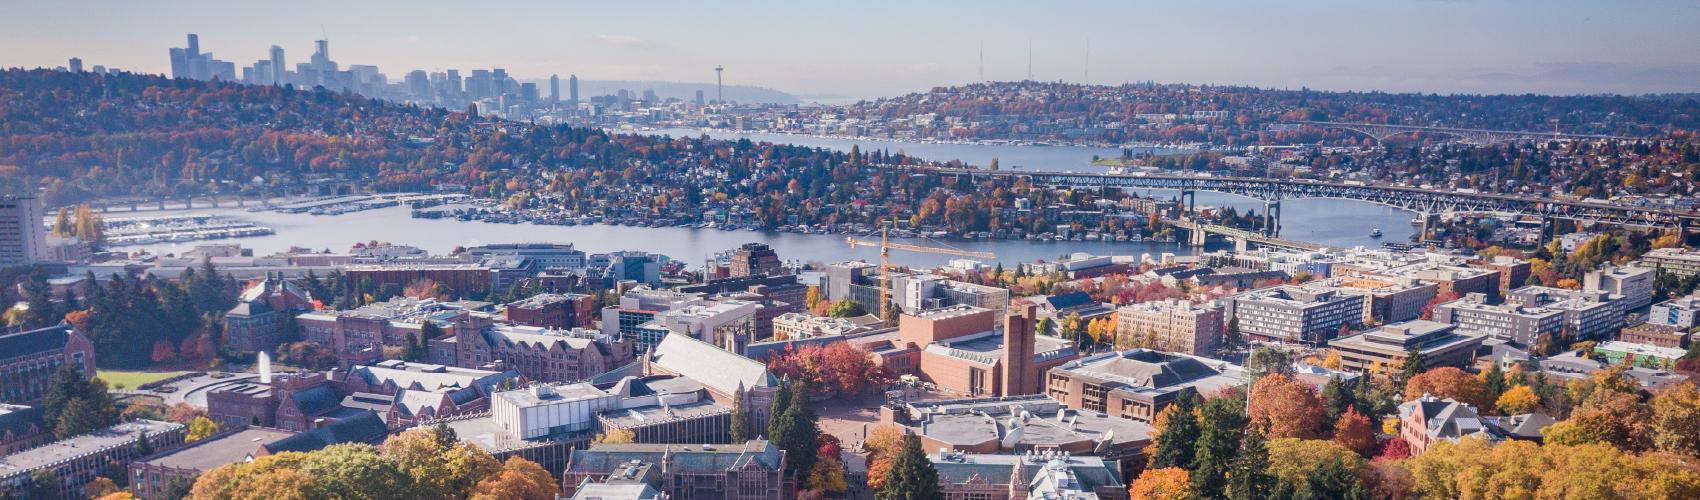 Aerial shot of UW campus with Seattle skyline in the background